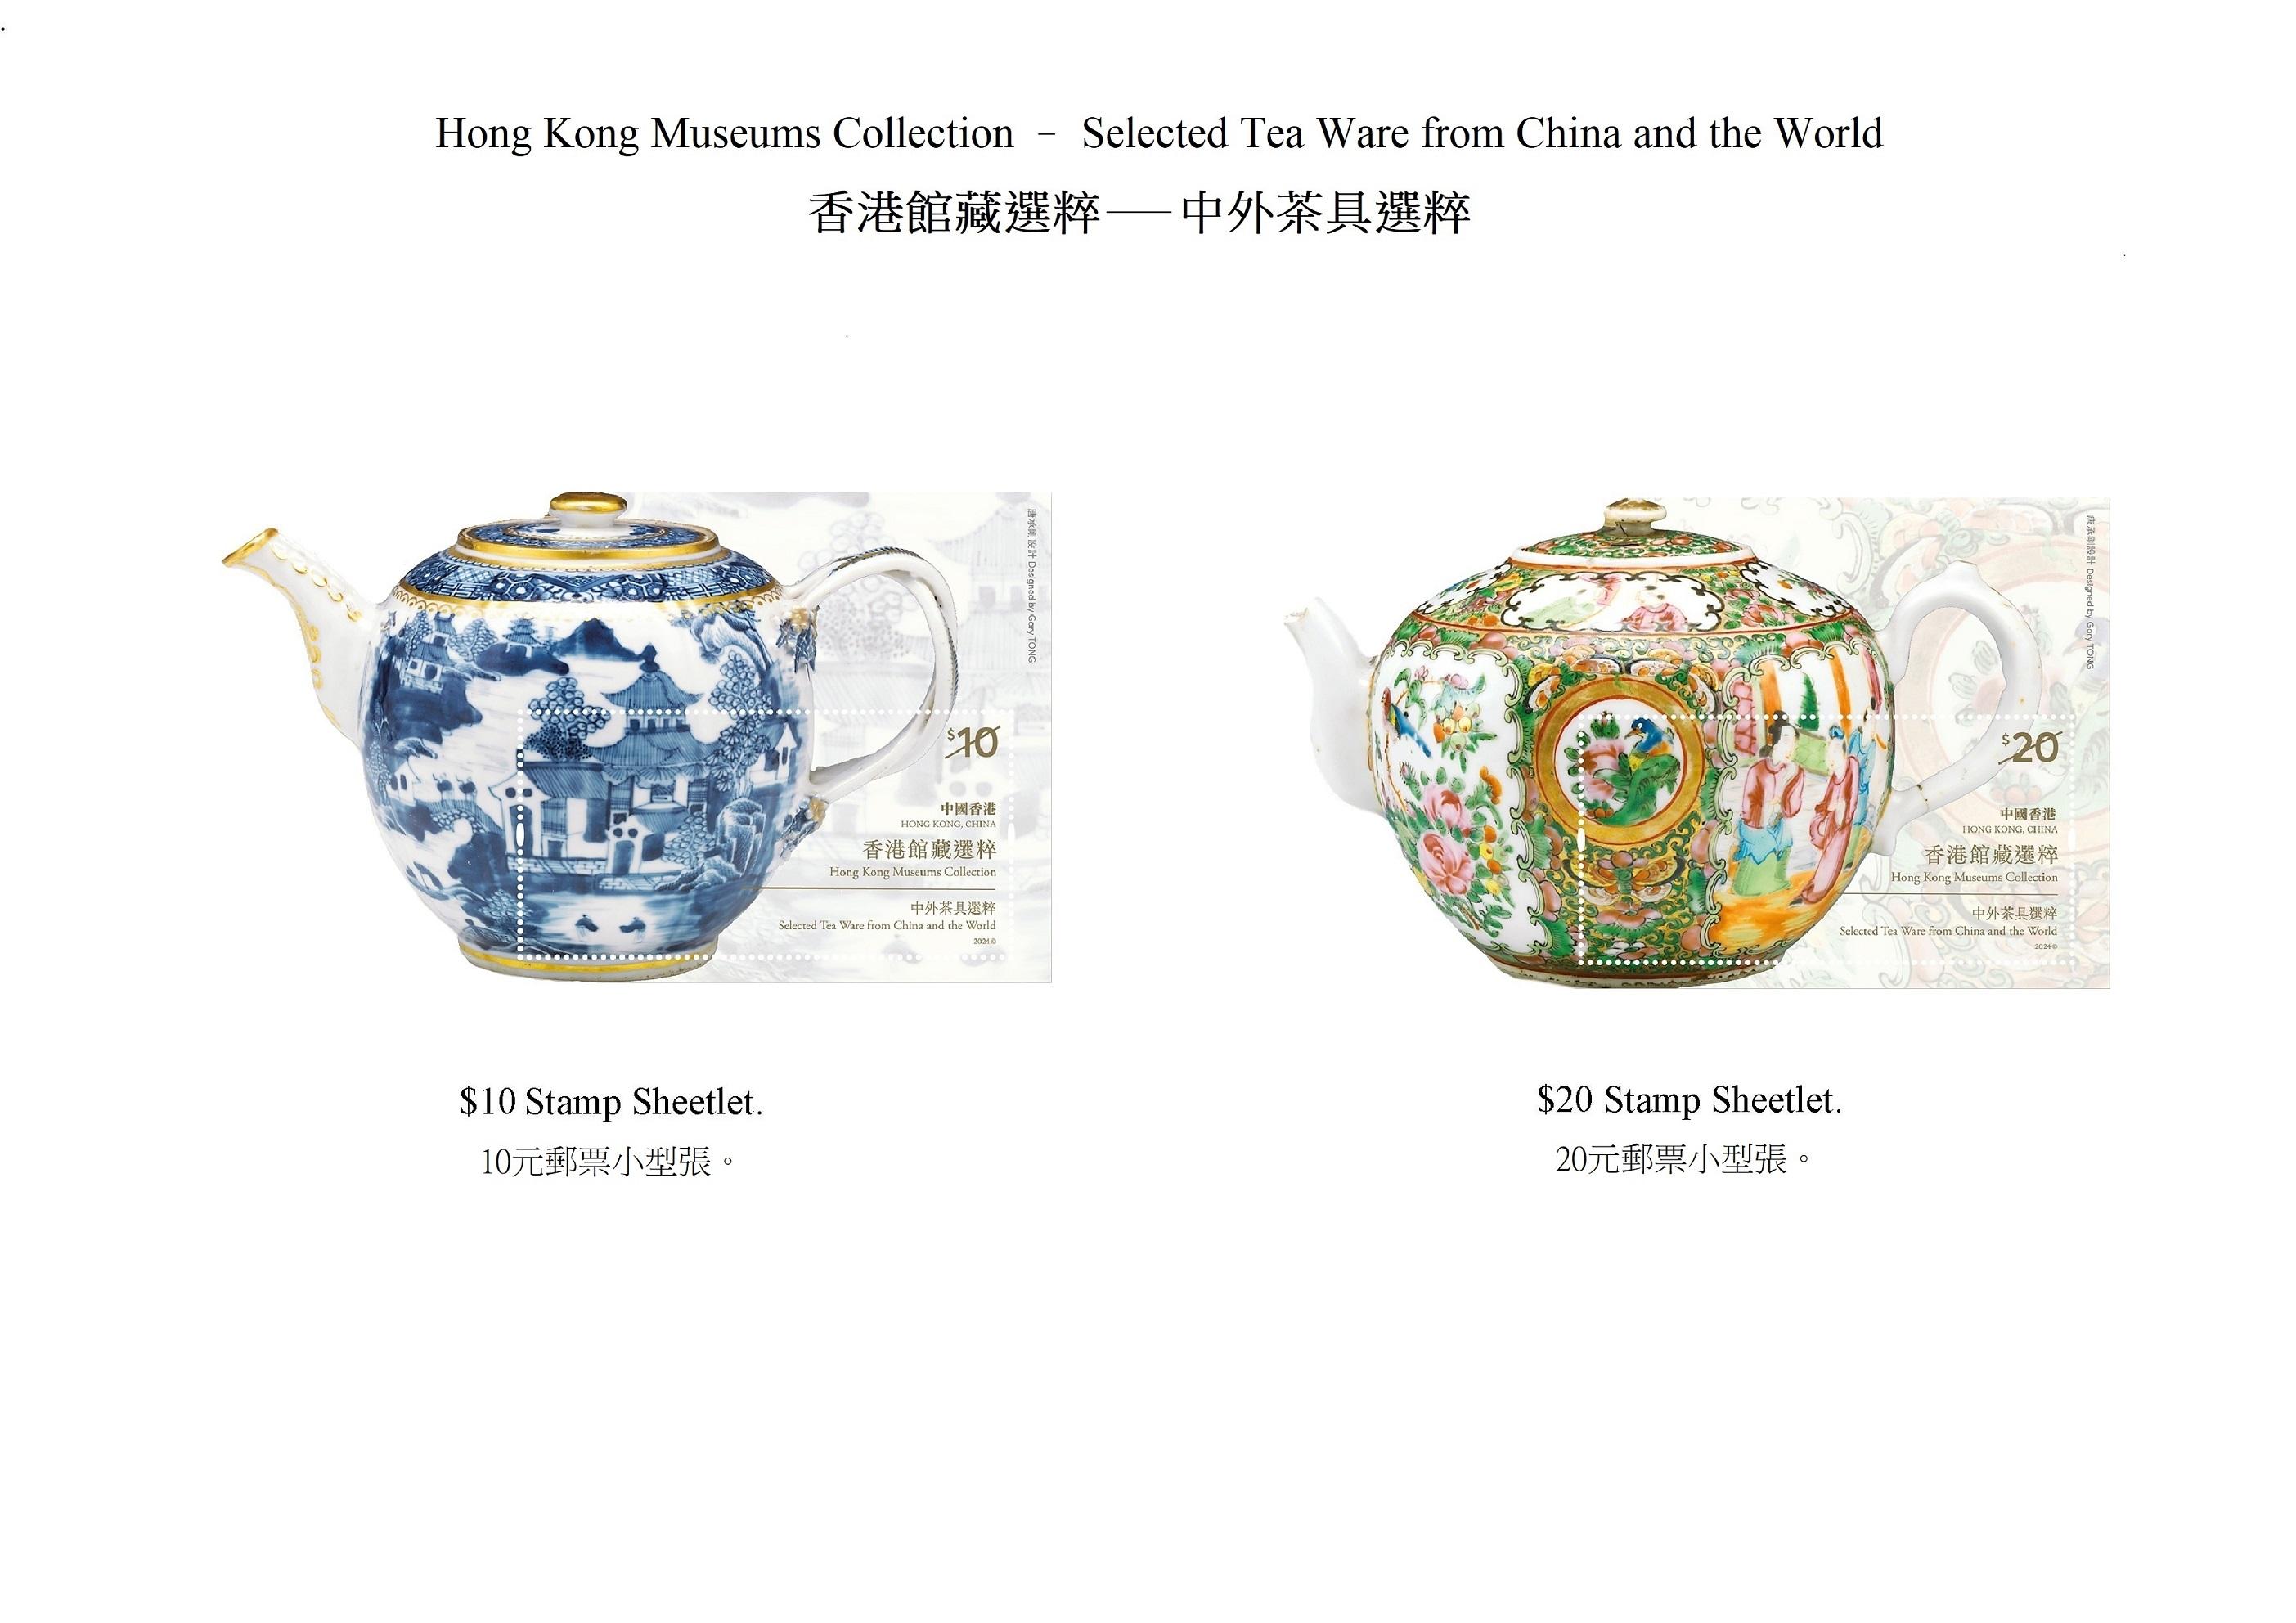 Hongkong Post will launch a special stamp issue and associated philatelic products on the theme of "Hong Kong Museums Collection - Selected Tea Ware from China and the World" on April 18 (Thursday). Photos show the stamp sheetlets.
